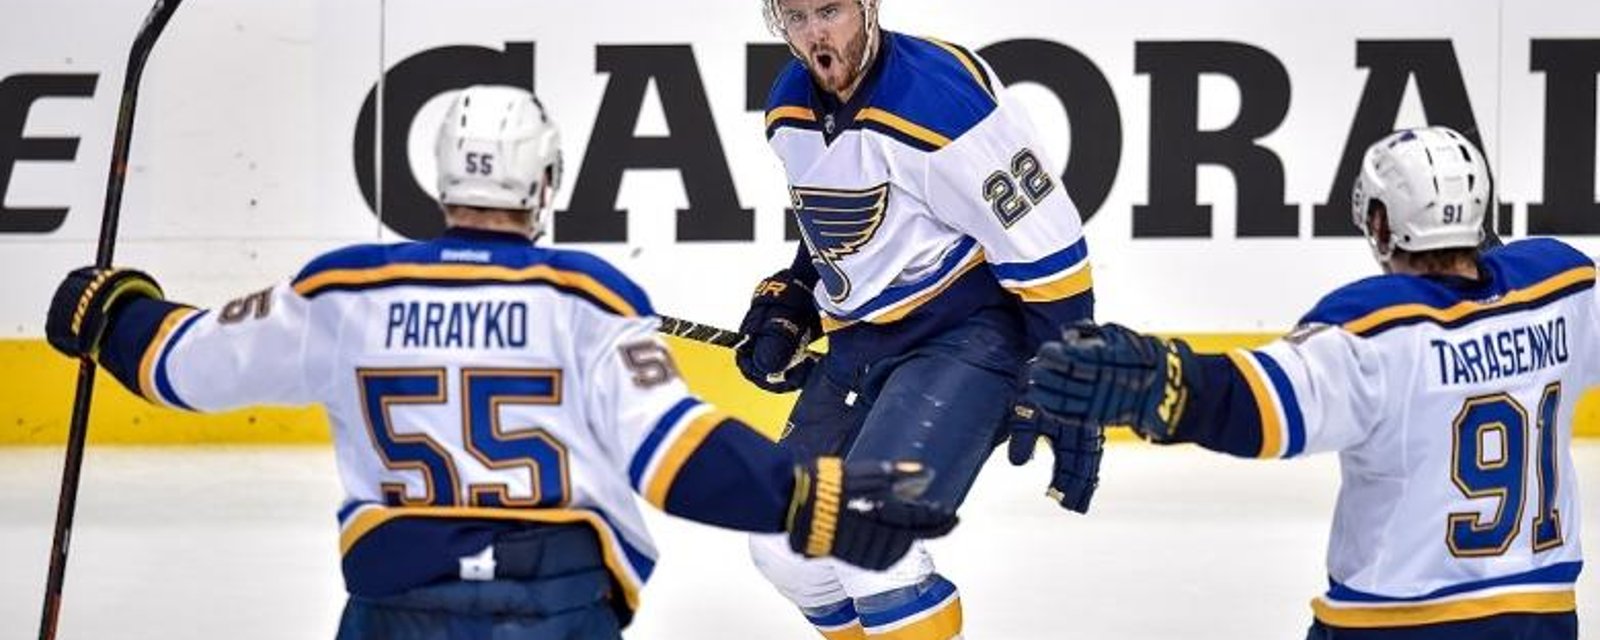 Report: Bruins have made an extremely aggressive offer for Shattenkirk.